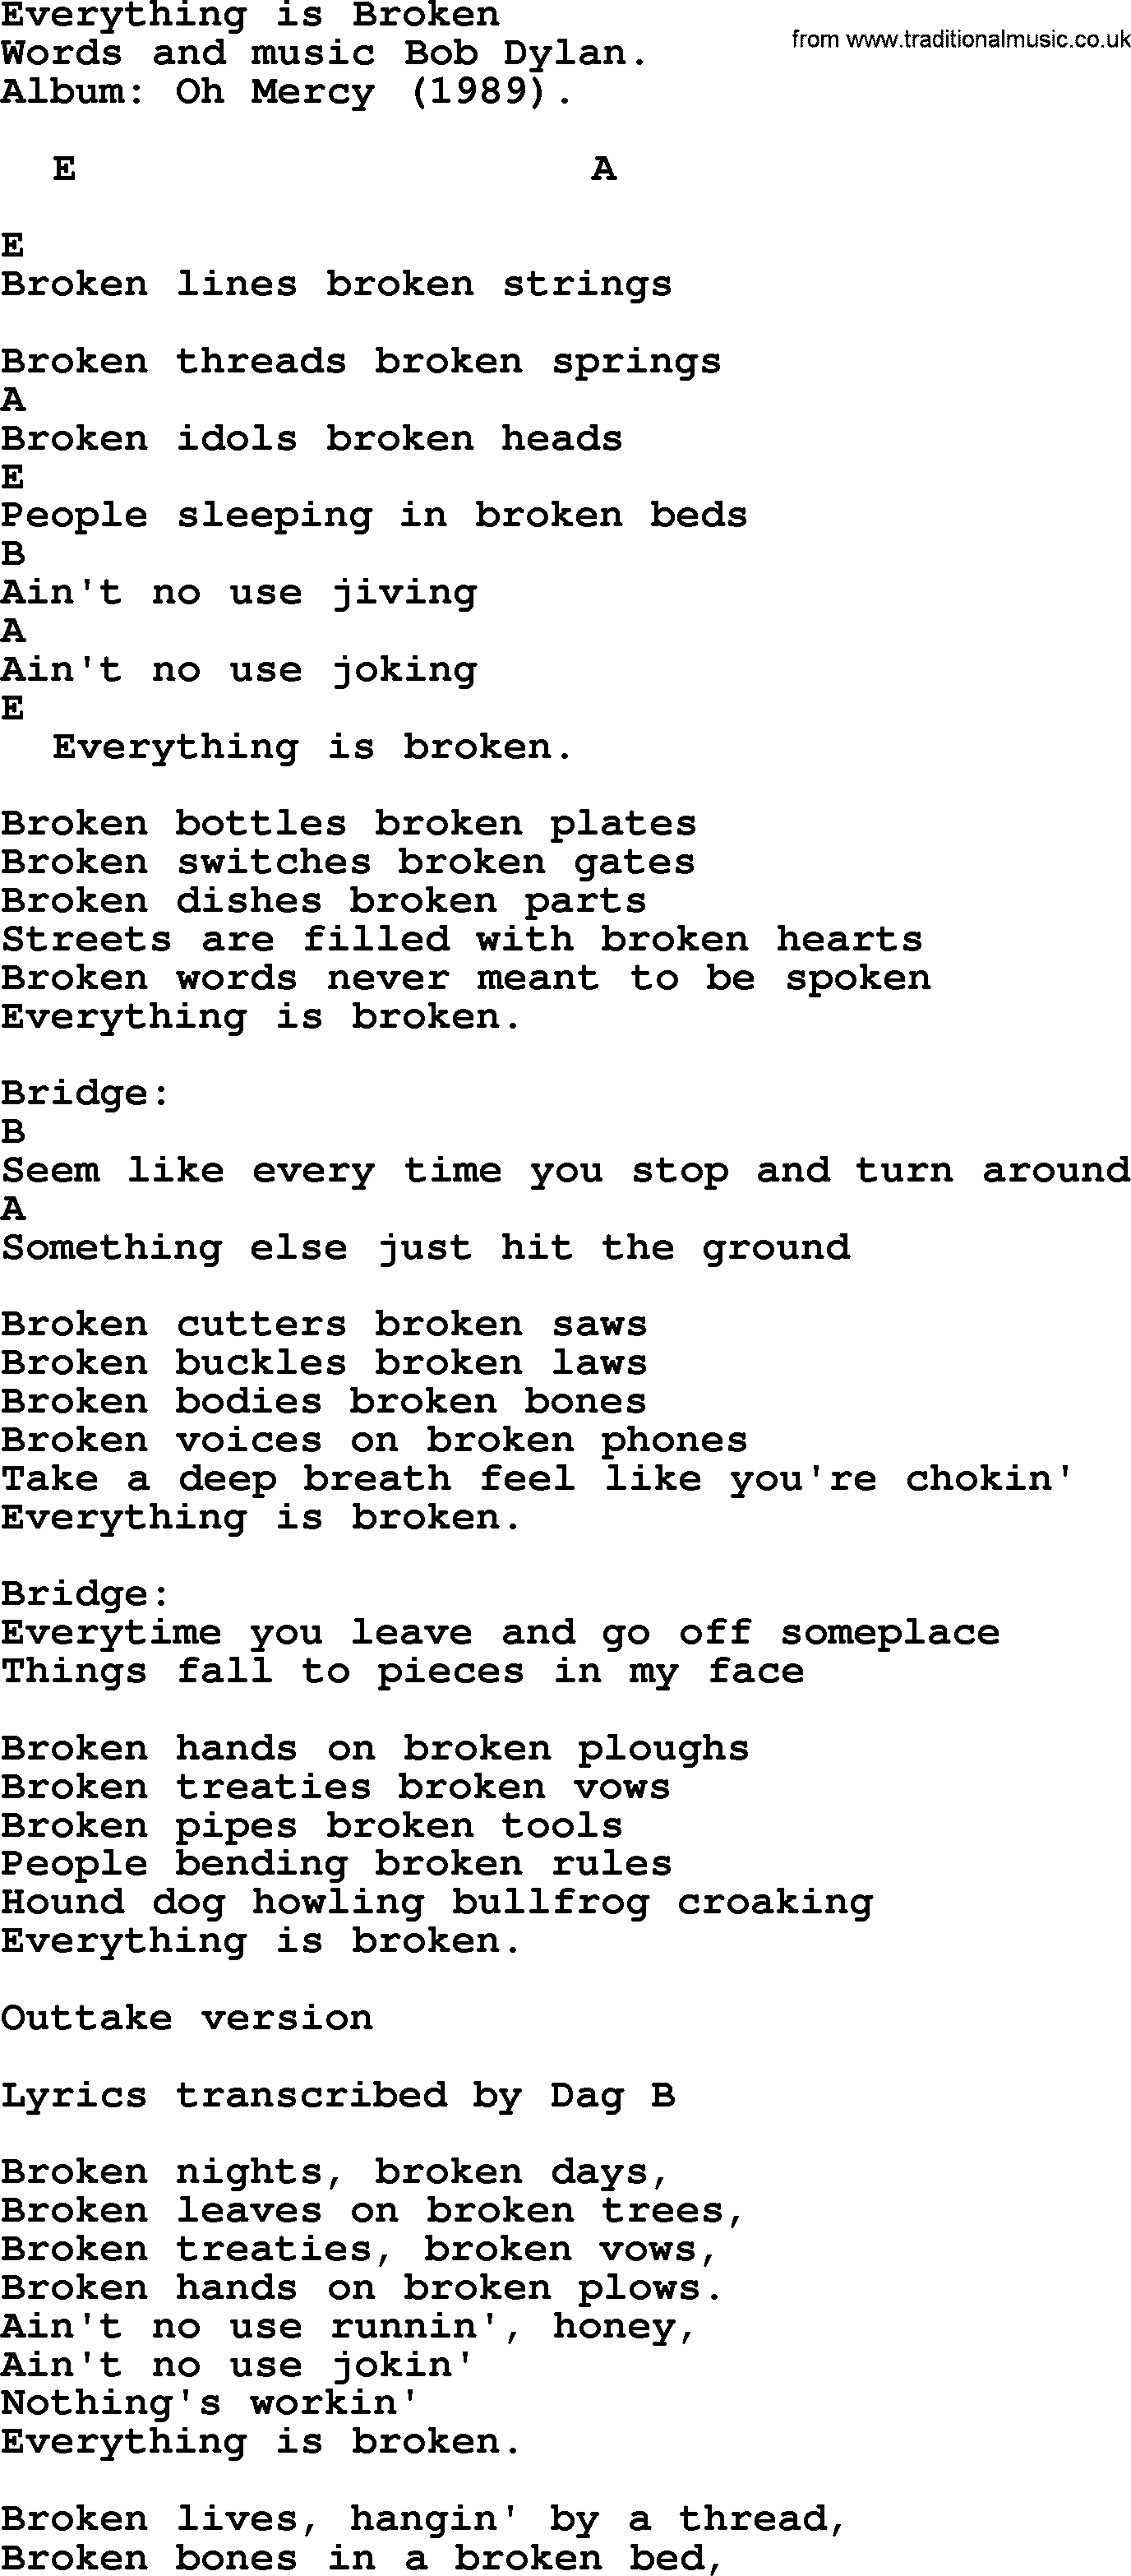 Bob Dylan song, lyrics with chords - Everything is Broken